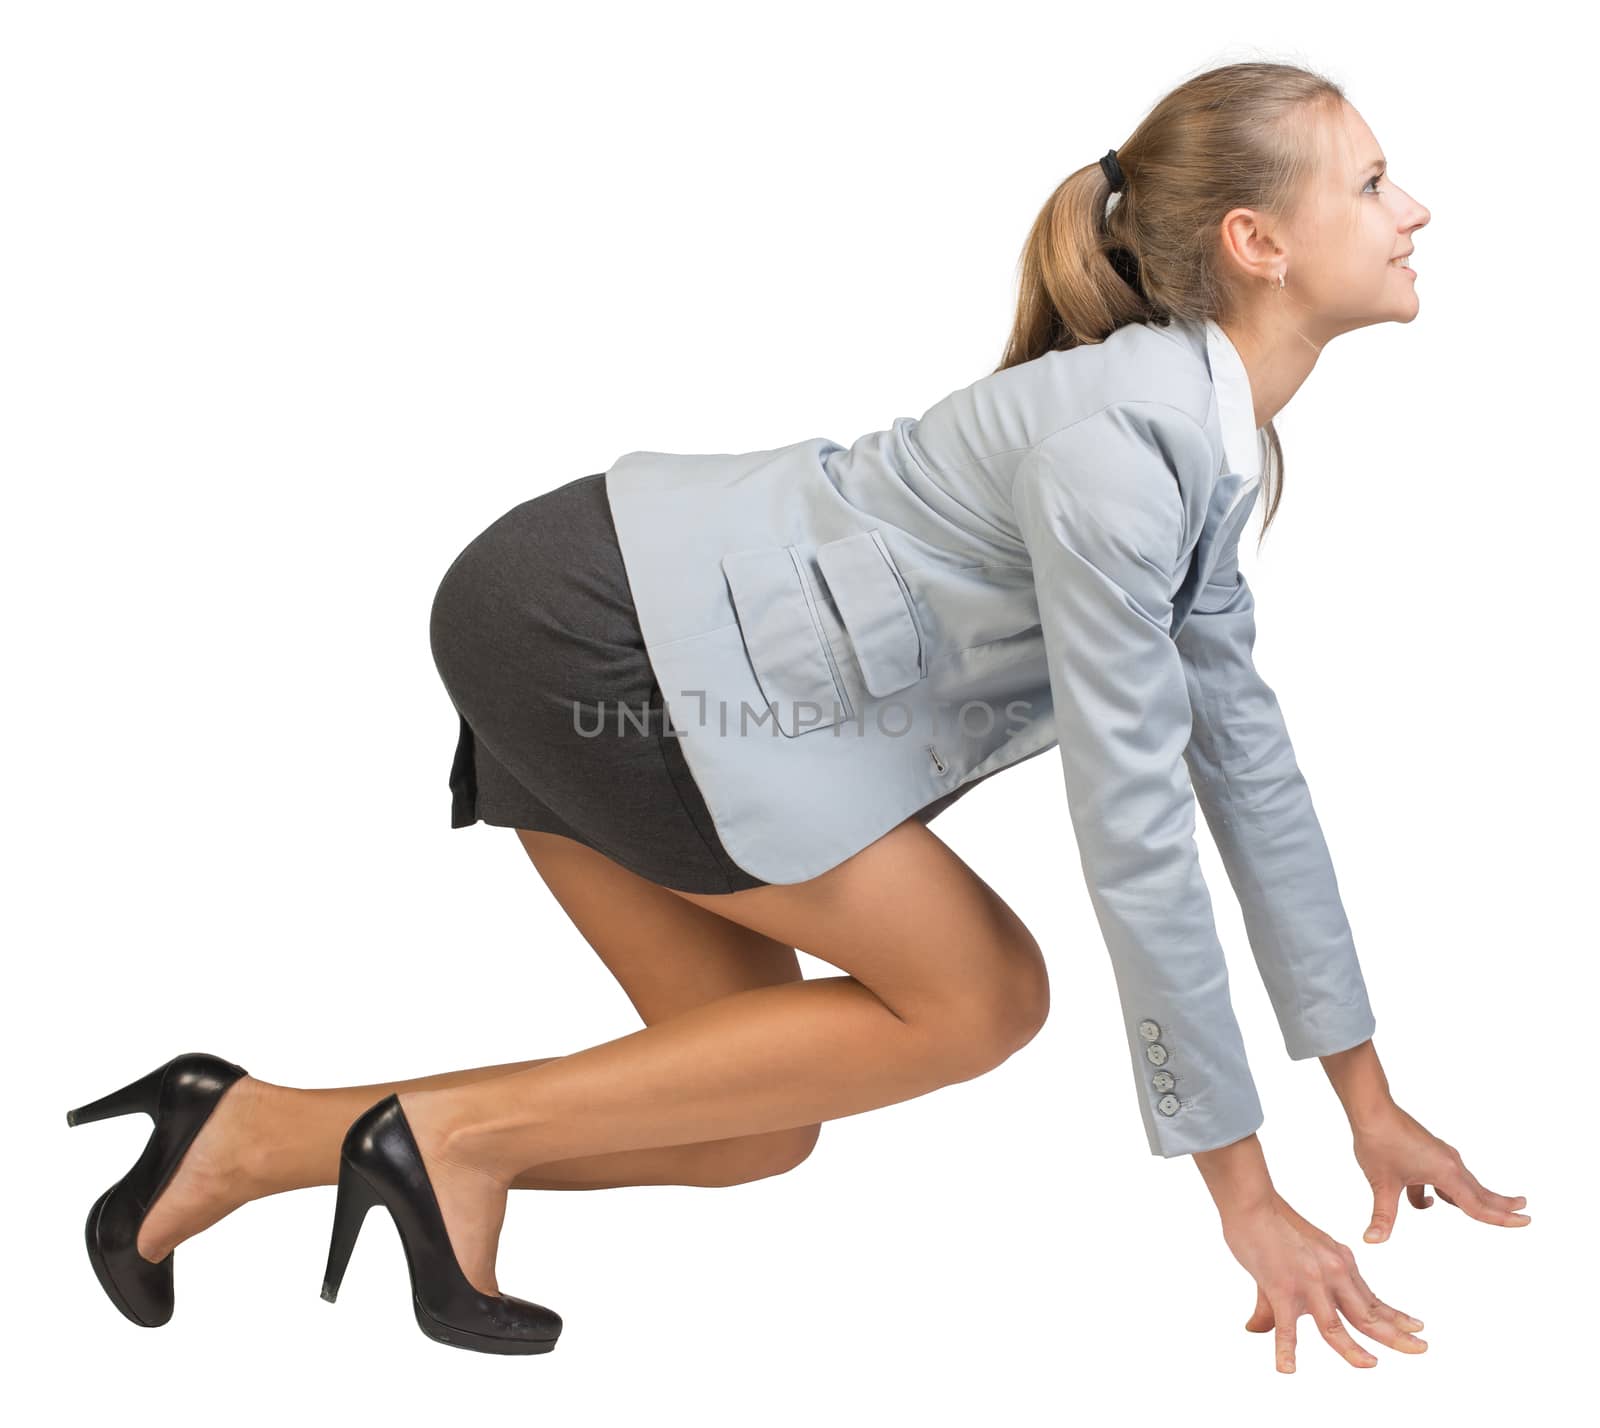 Businesswoman standing in running start pose, smiling, side view. Isolated over white background